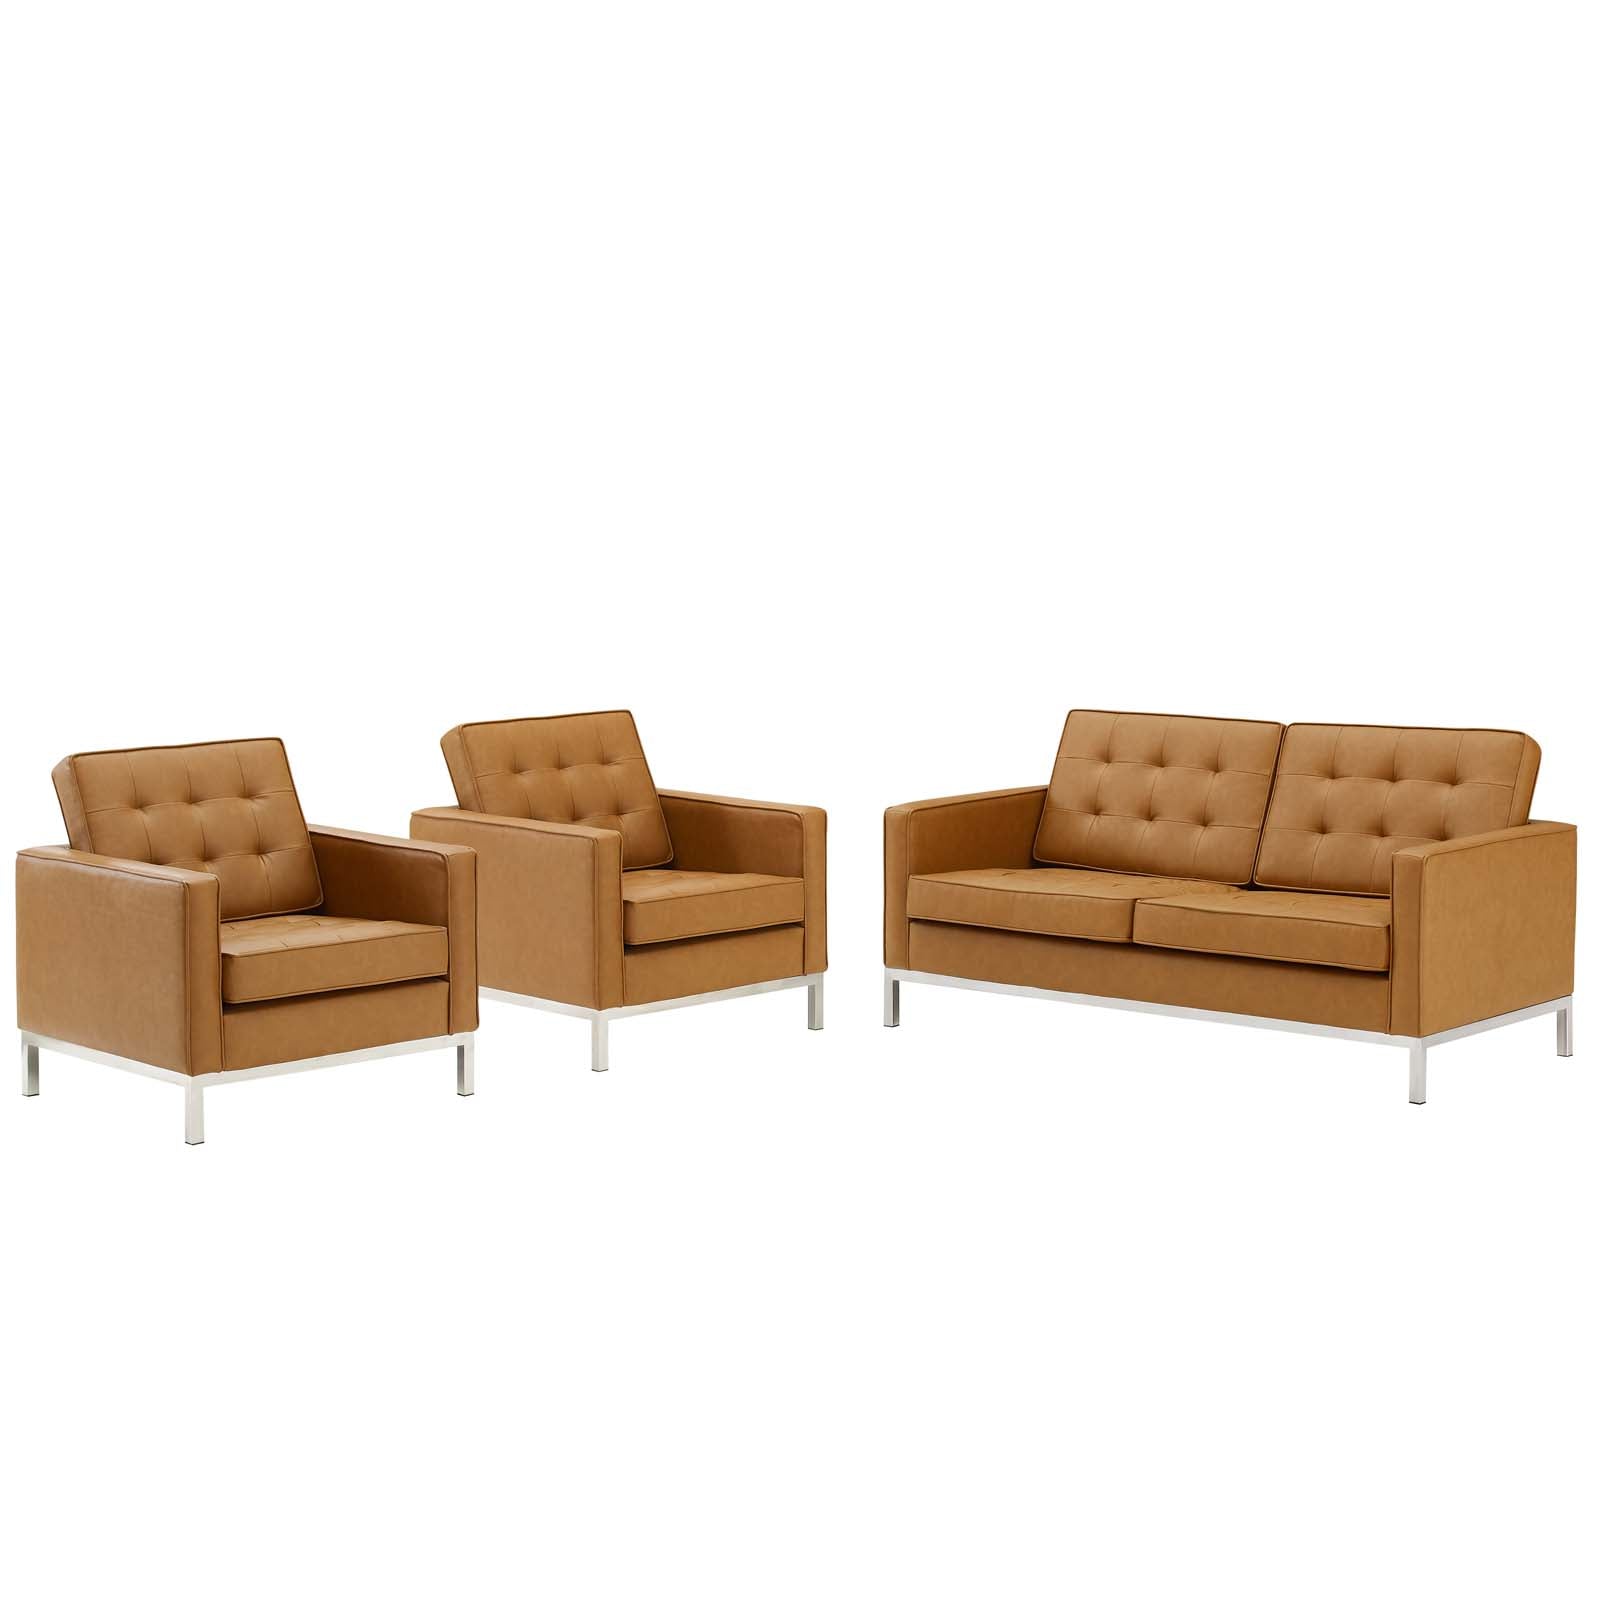 Modway Living Room Sets - Loft 3 Piece Upholstered Faux Leather Set Silver Tan